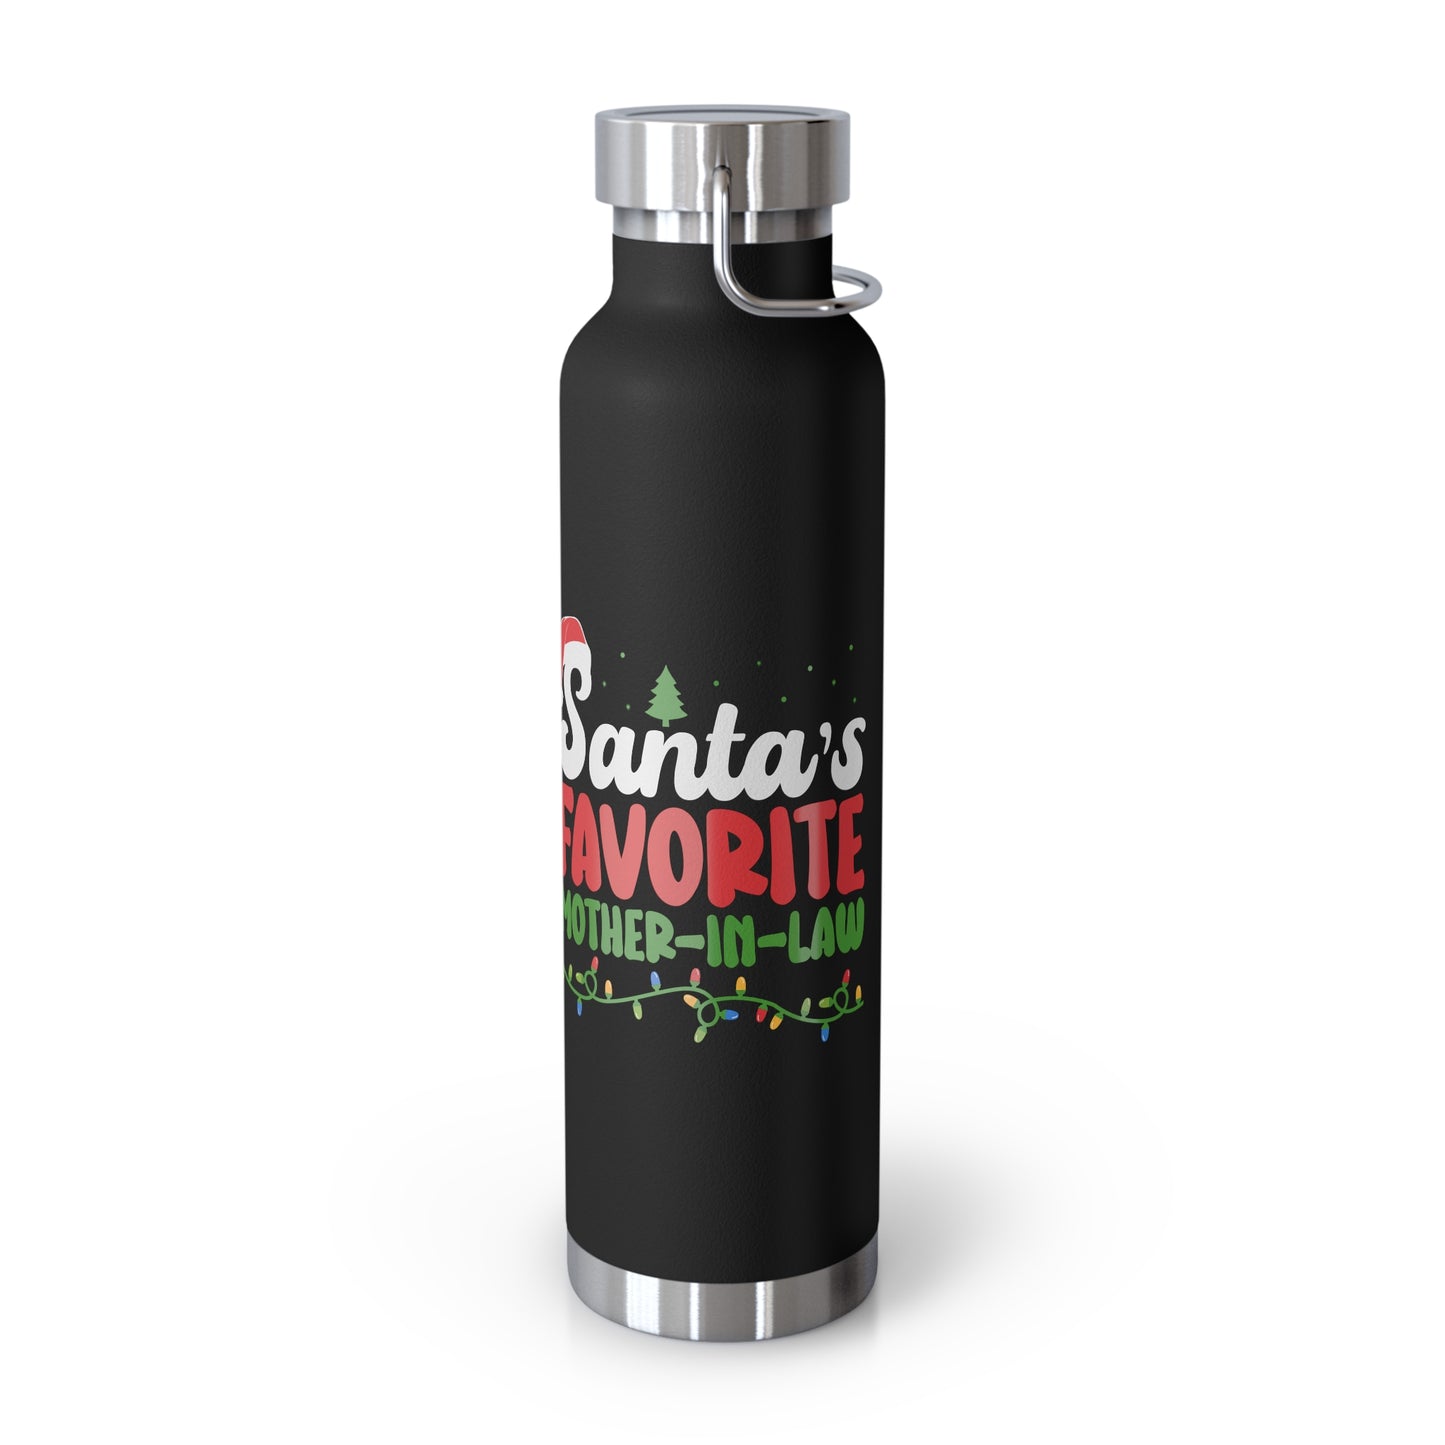 Santa's Favorite Mother-In-Law Copper Vacuum Insulated Bottle, 22oz